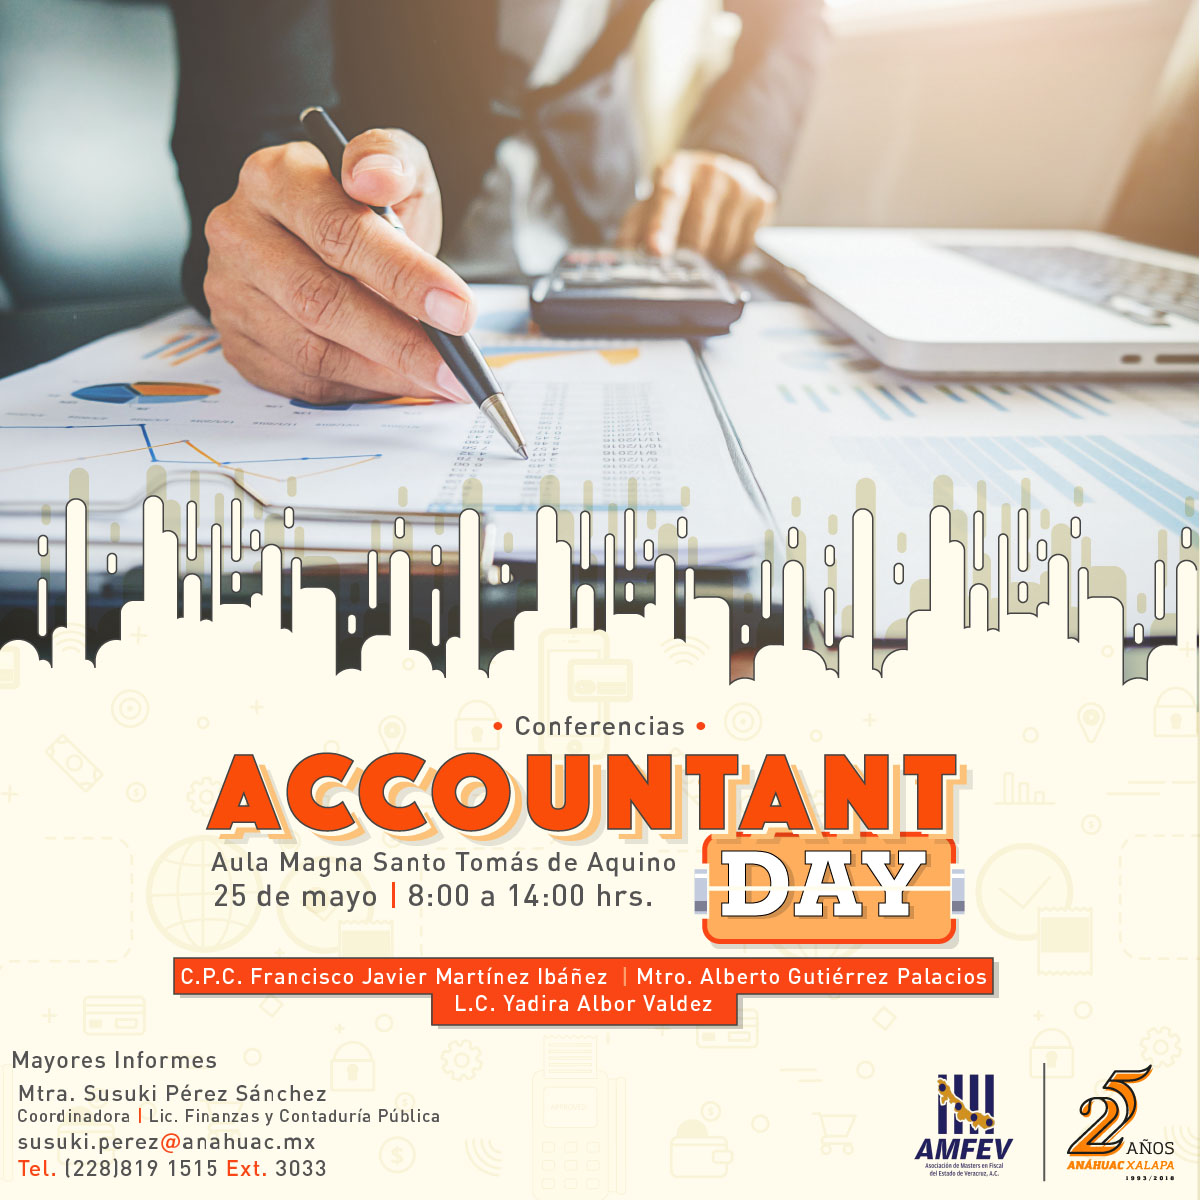 Accountant Day 2018